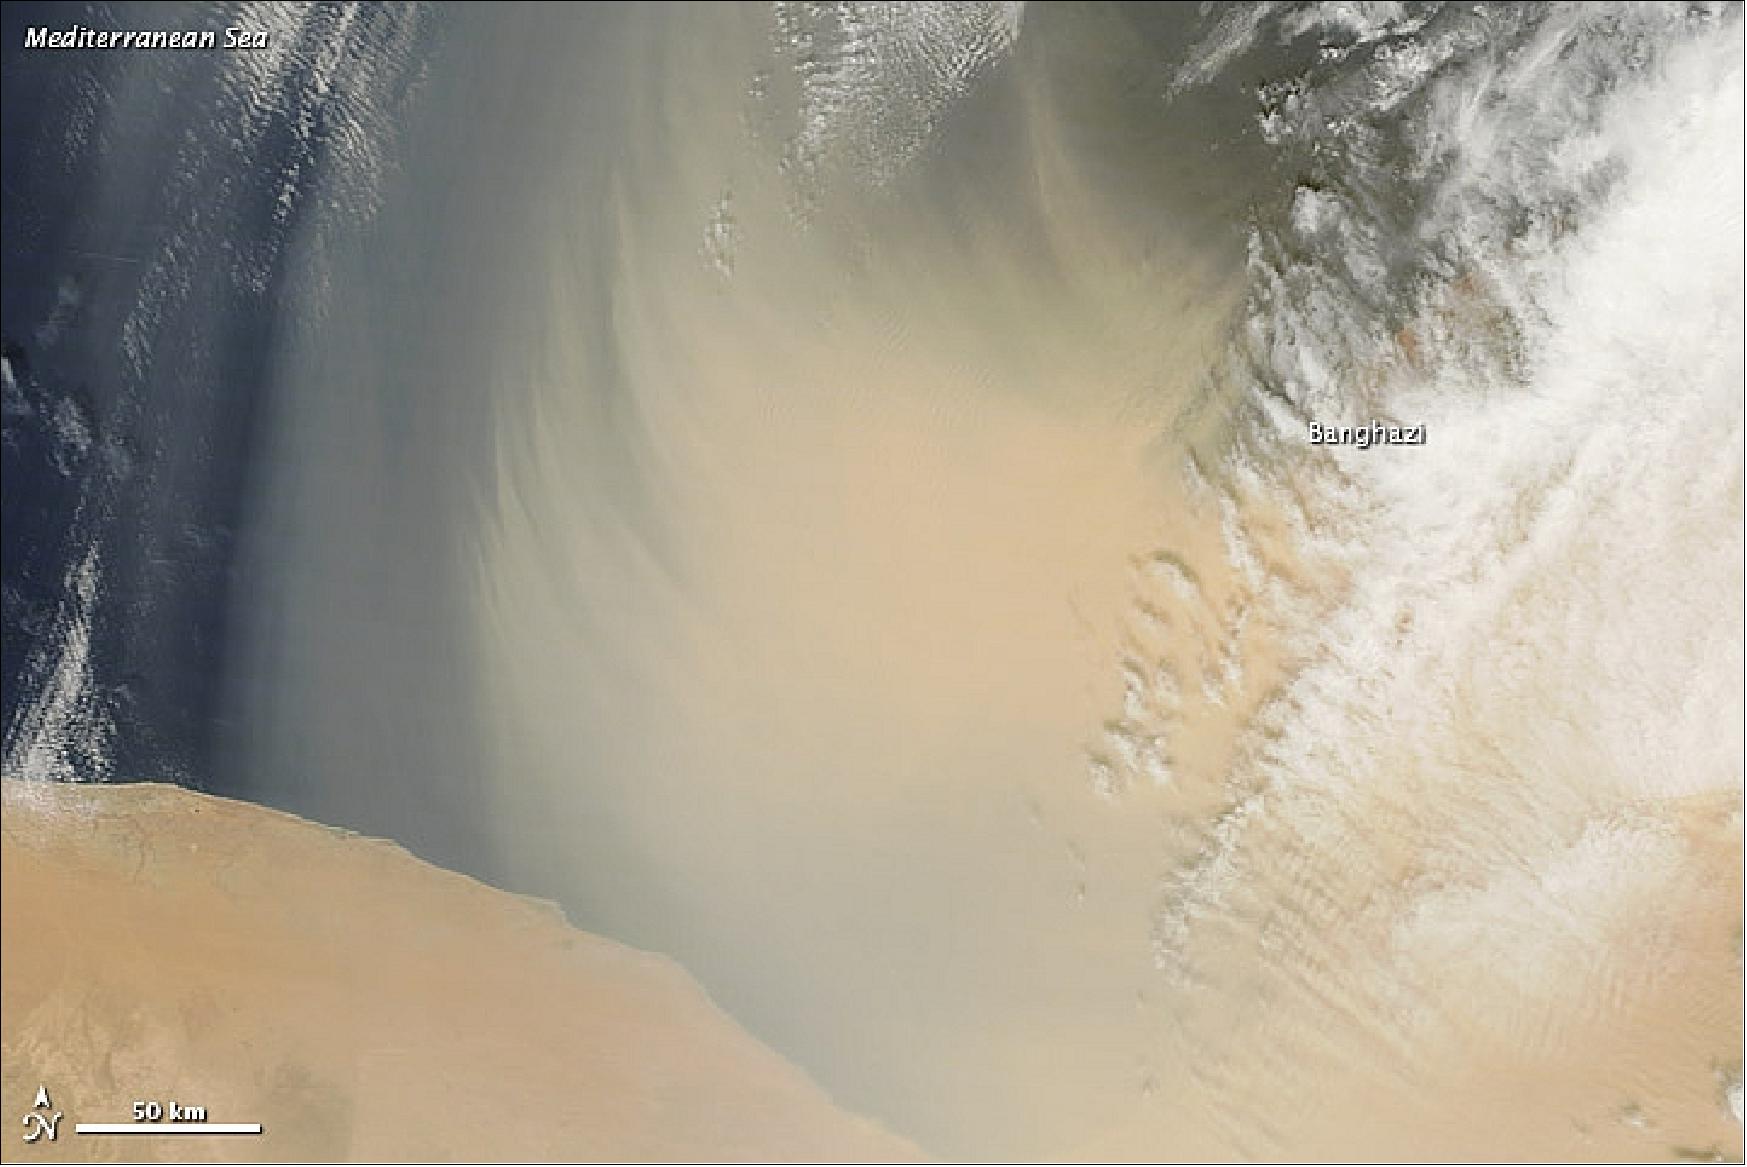 Figure 114: MODIS image of a dust storm that blew out of Libya and across the Mediterranean Sea in late March 2013 (image credit: NASA)